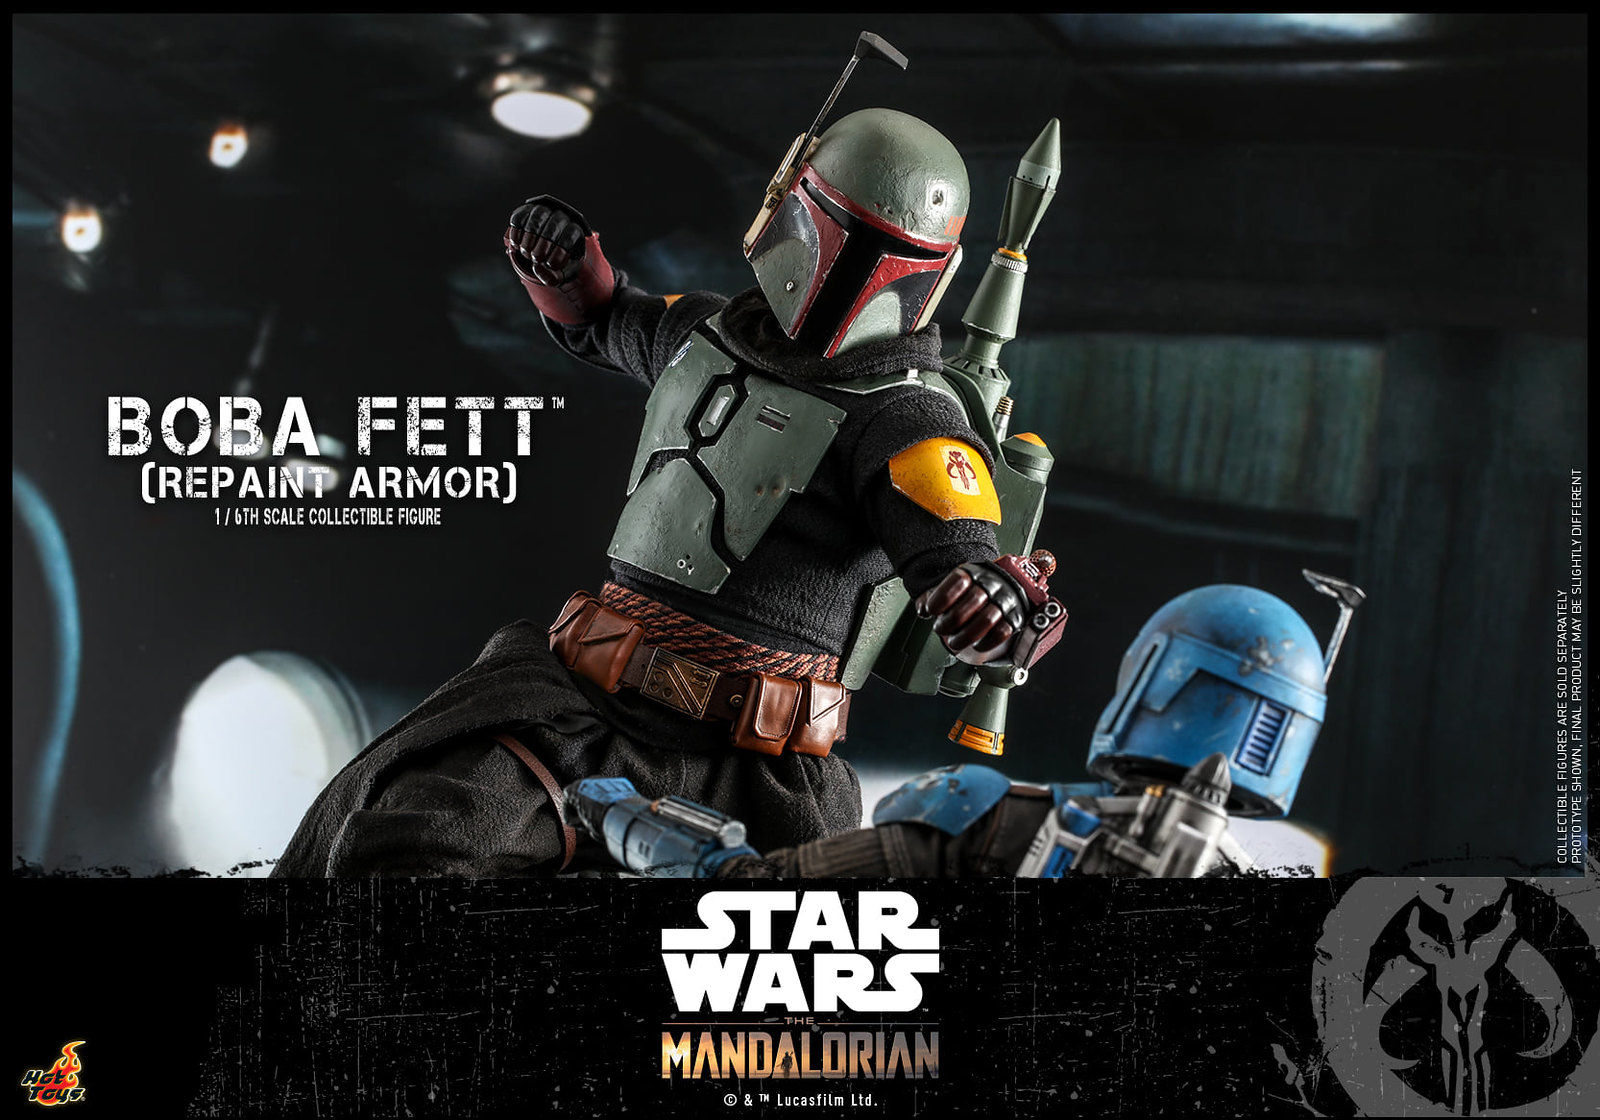 Star Wars: The Mandalorian™ - 1/6th scale Boba Fett™ (Repaint Armor) Collectible figure/ figure and Throne Collectible Set 51312290475_1f49c36106_h